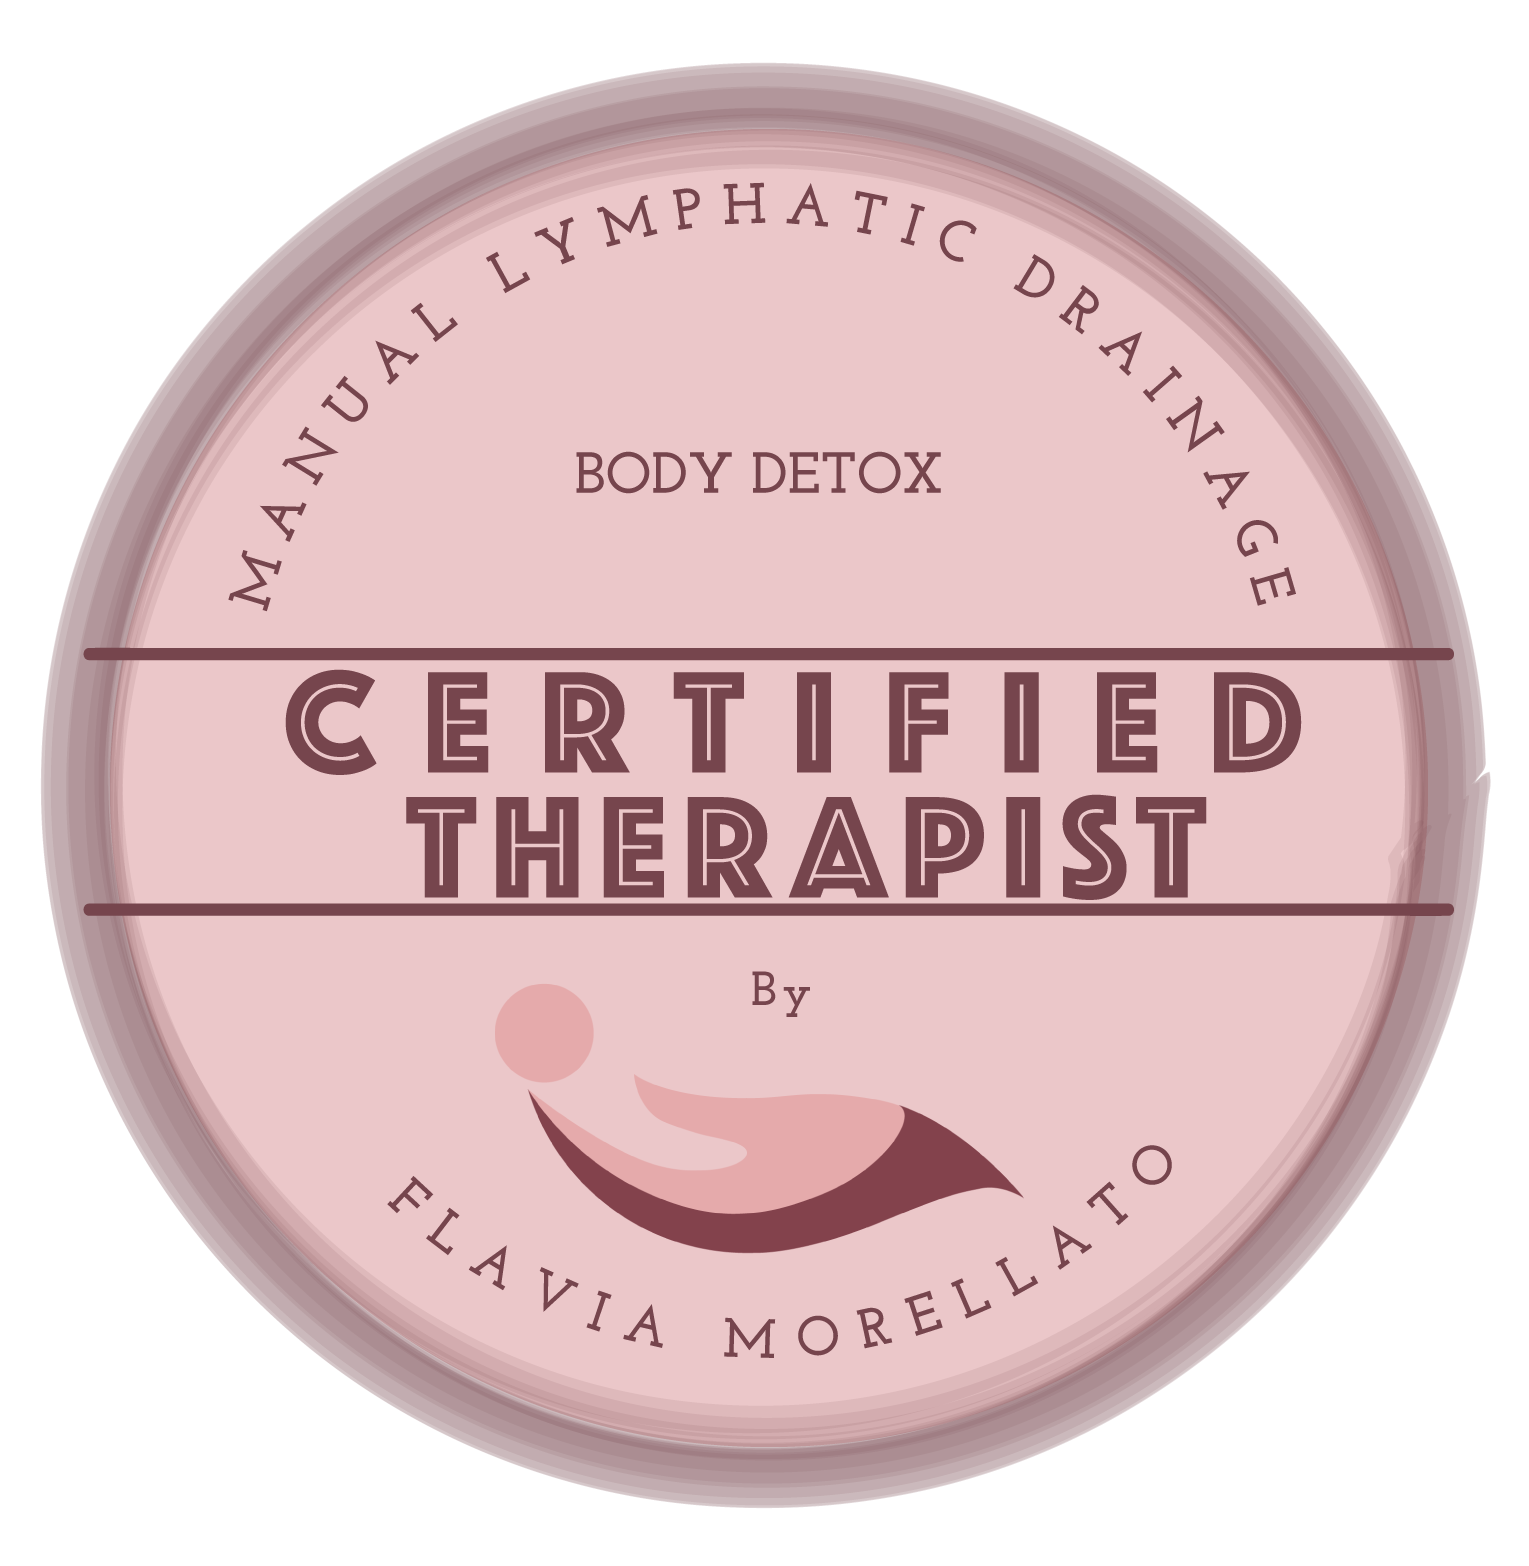 Manual Lymphatic Drainage certified therapist, body detox